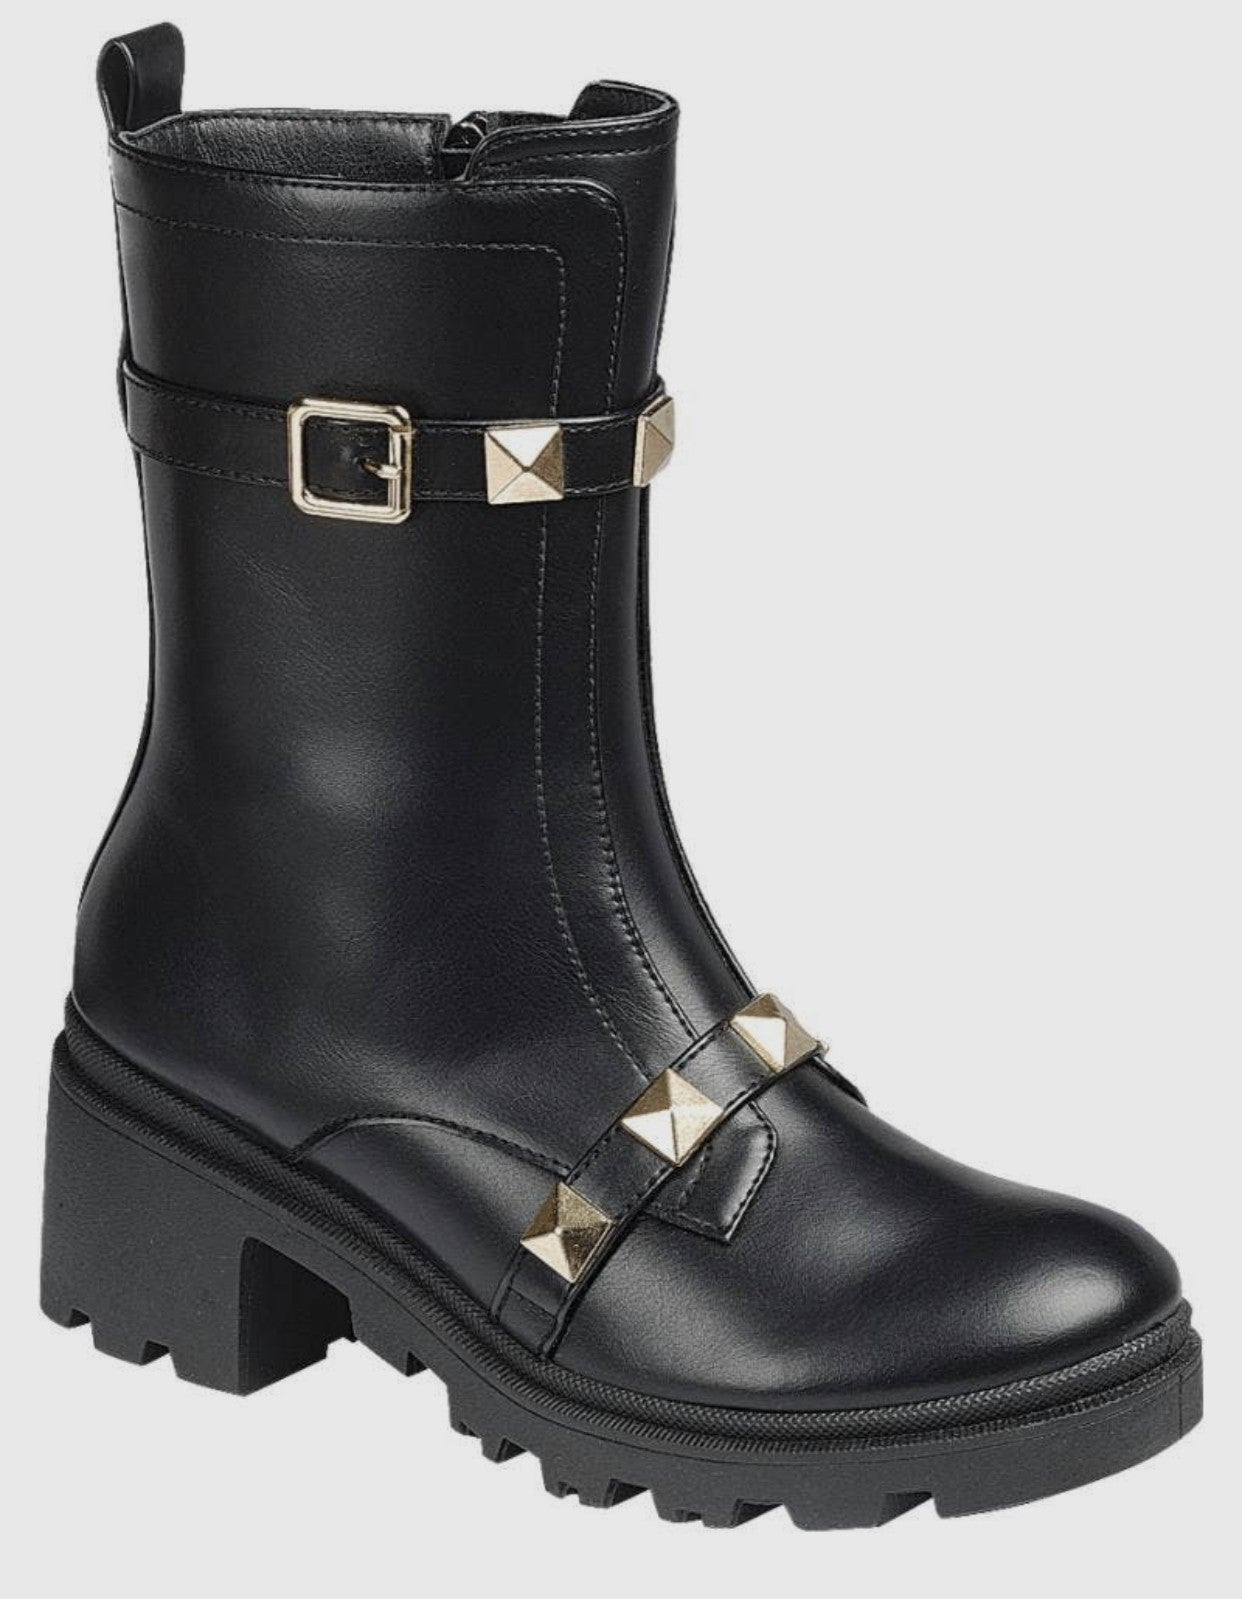 Pacific studded boots